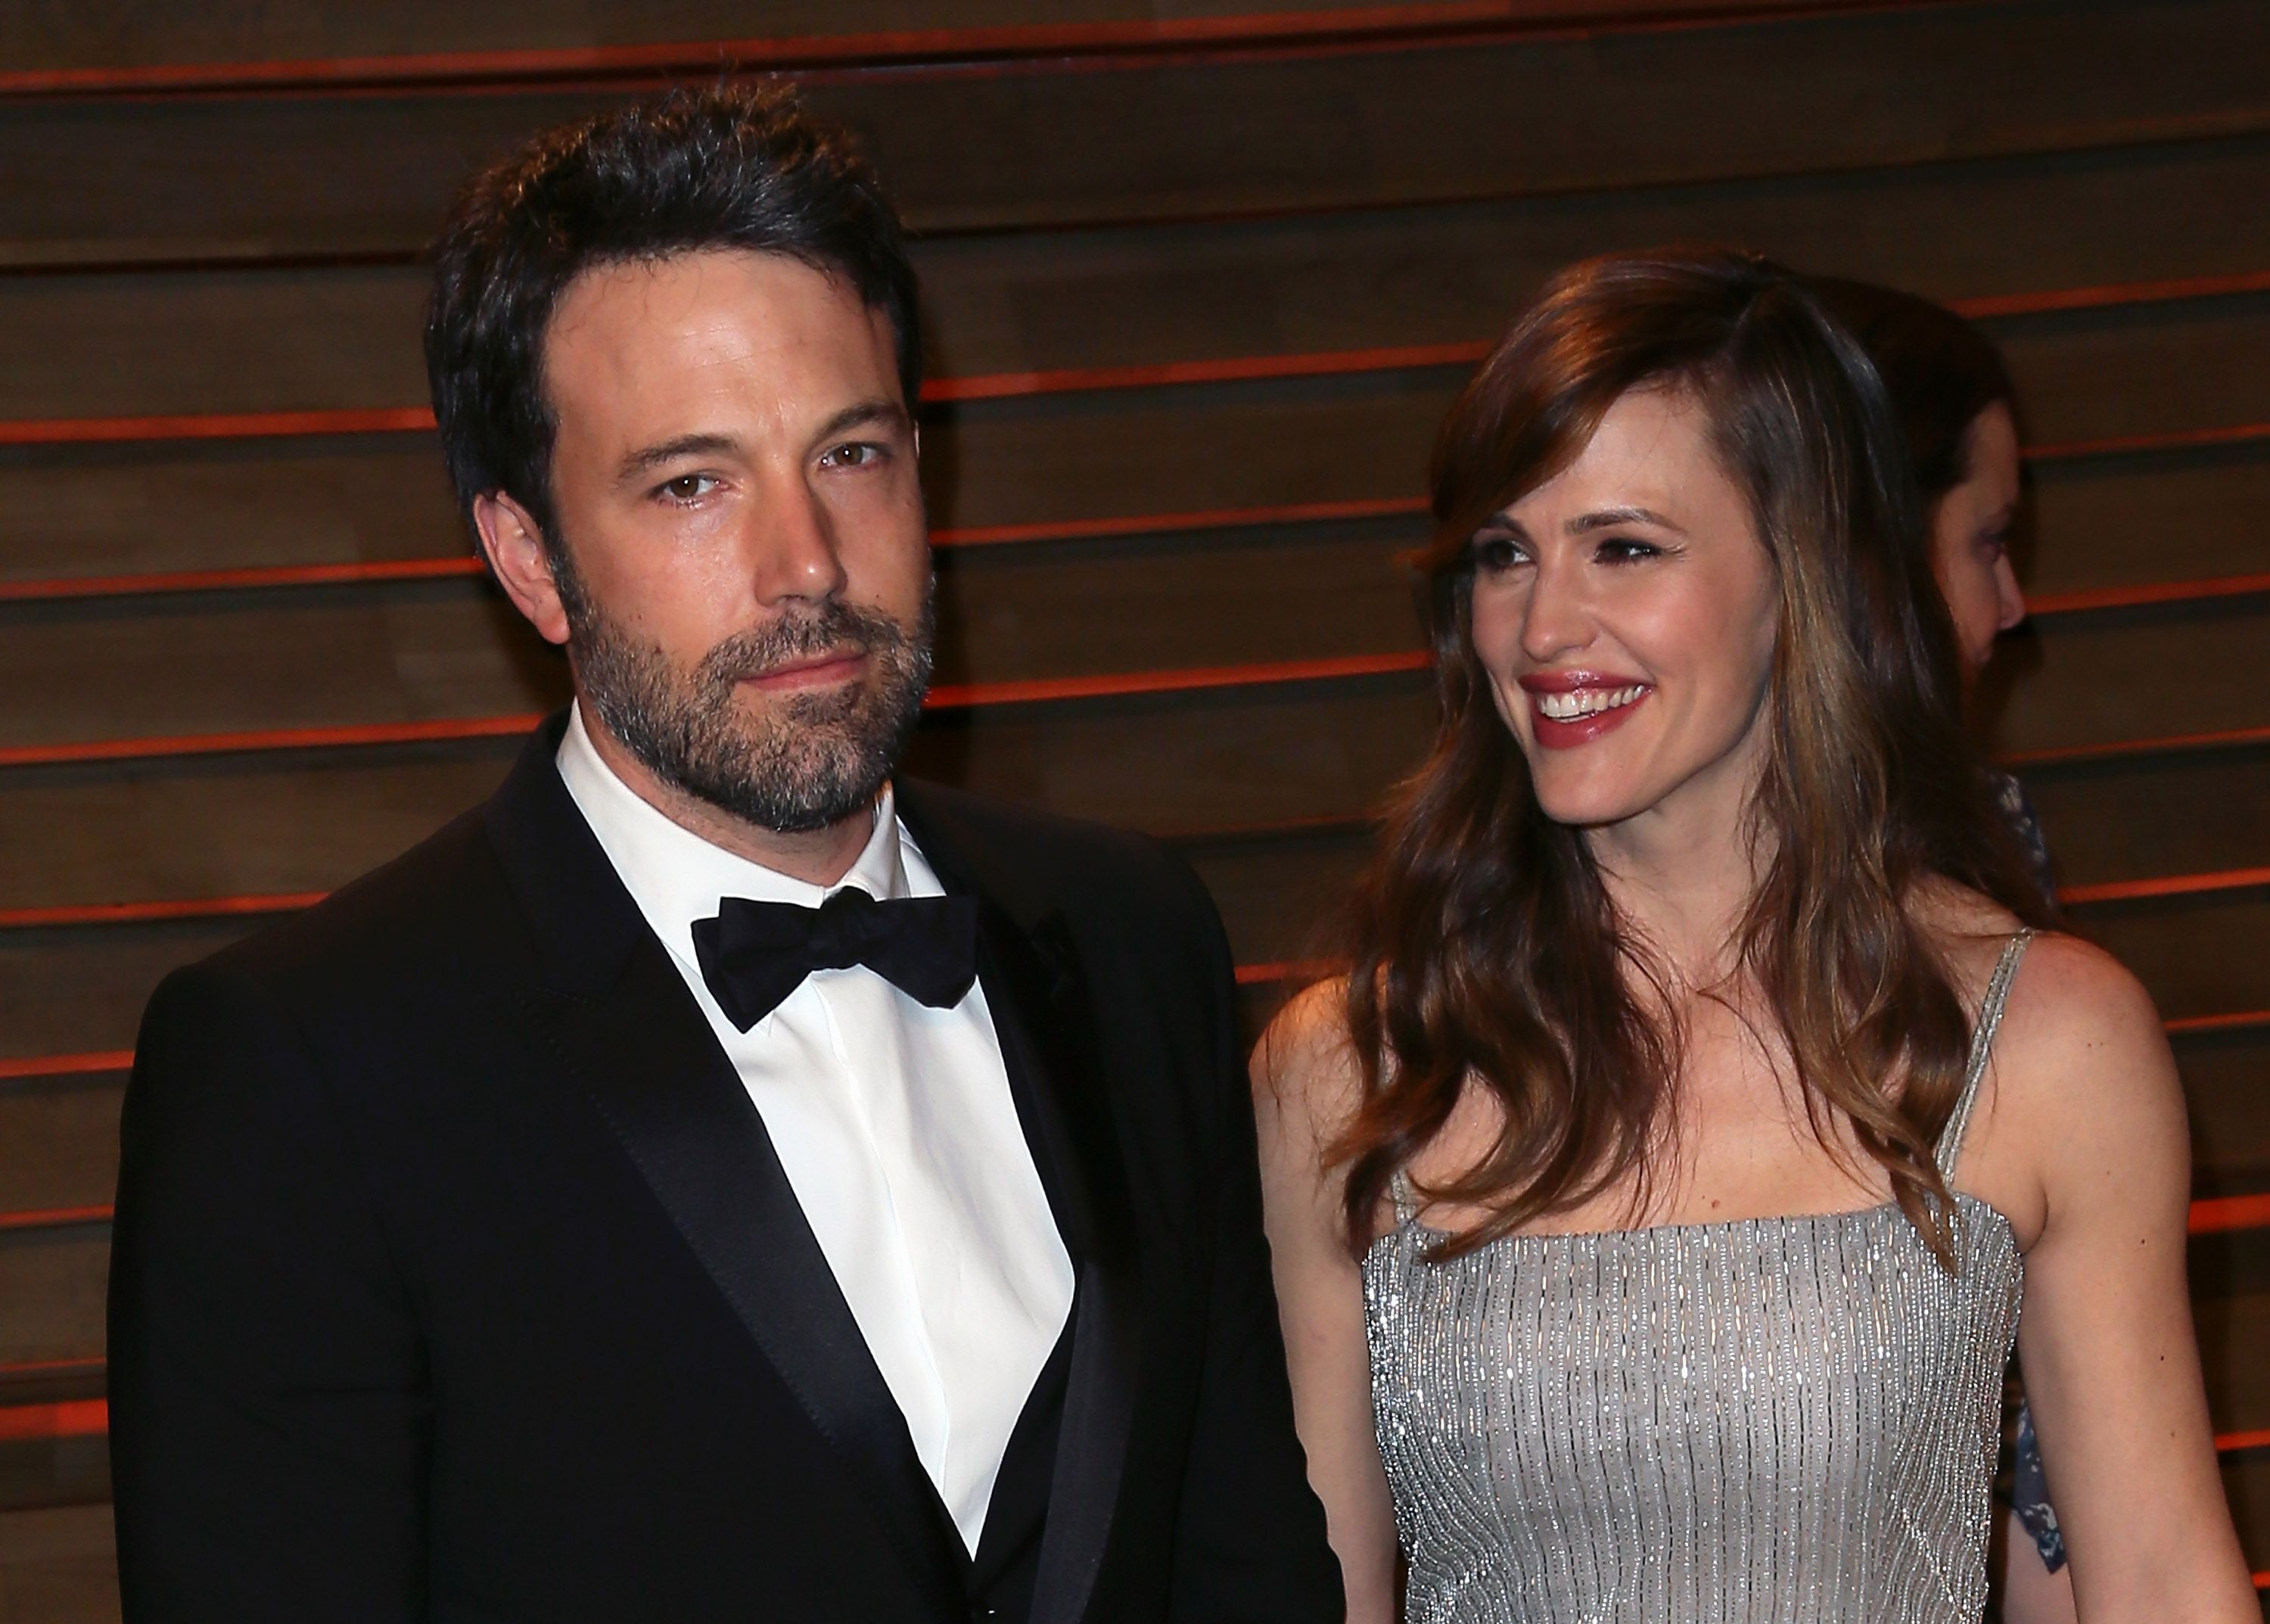 Ben Affleck and Jennifer Garner attend the 2014 Vanity Fair Oscar Party hosted by Graydon Carter on March 2, 2014. | Source: Getty Images